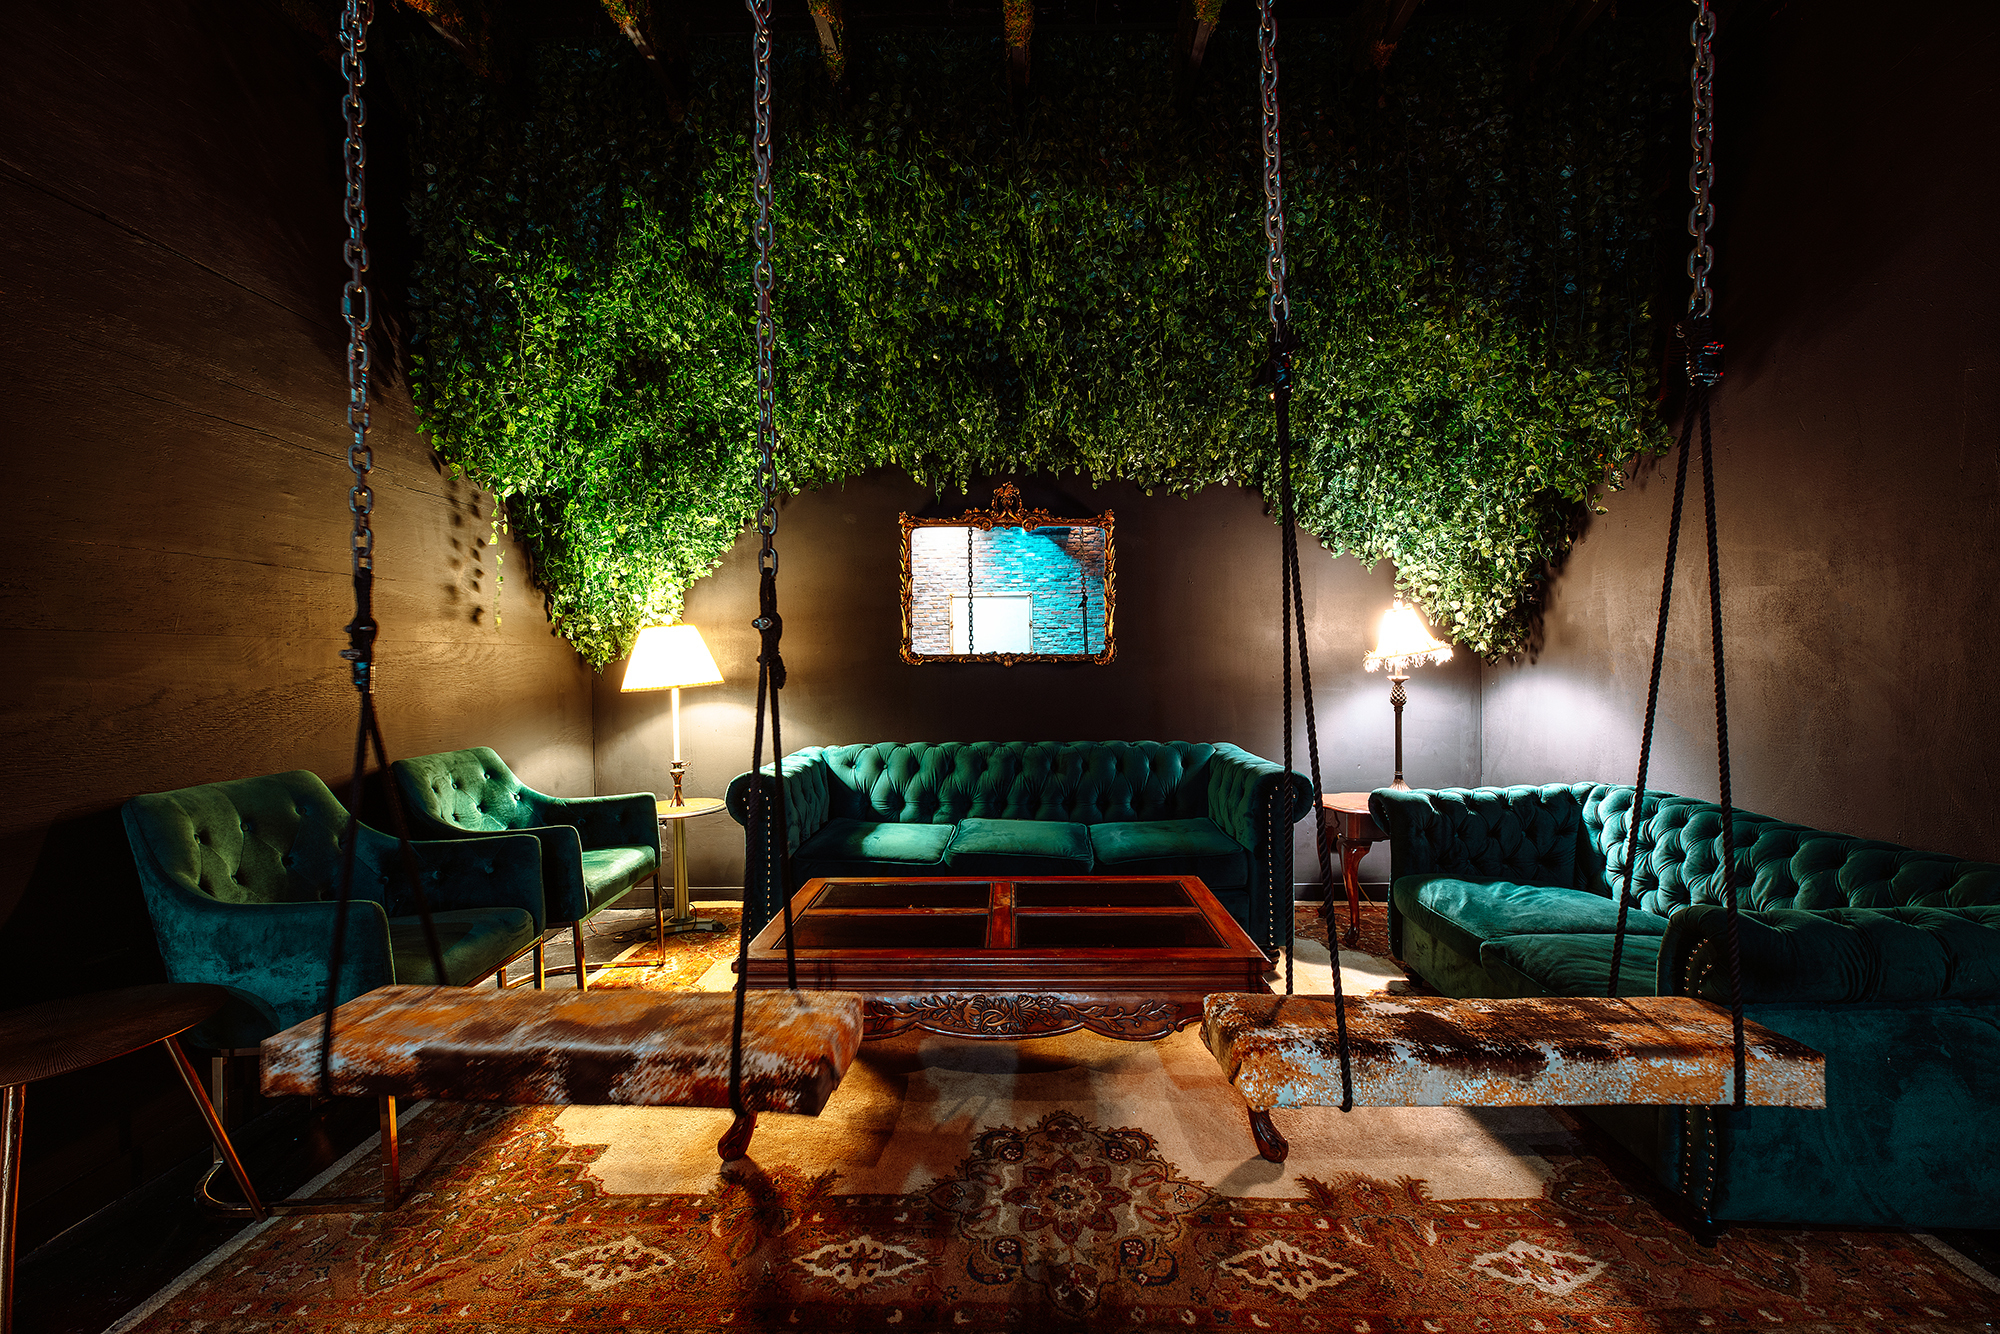 The green area at Savage Labs features green velvet couches, swings, greenery, and ambient lighting.